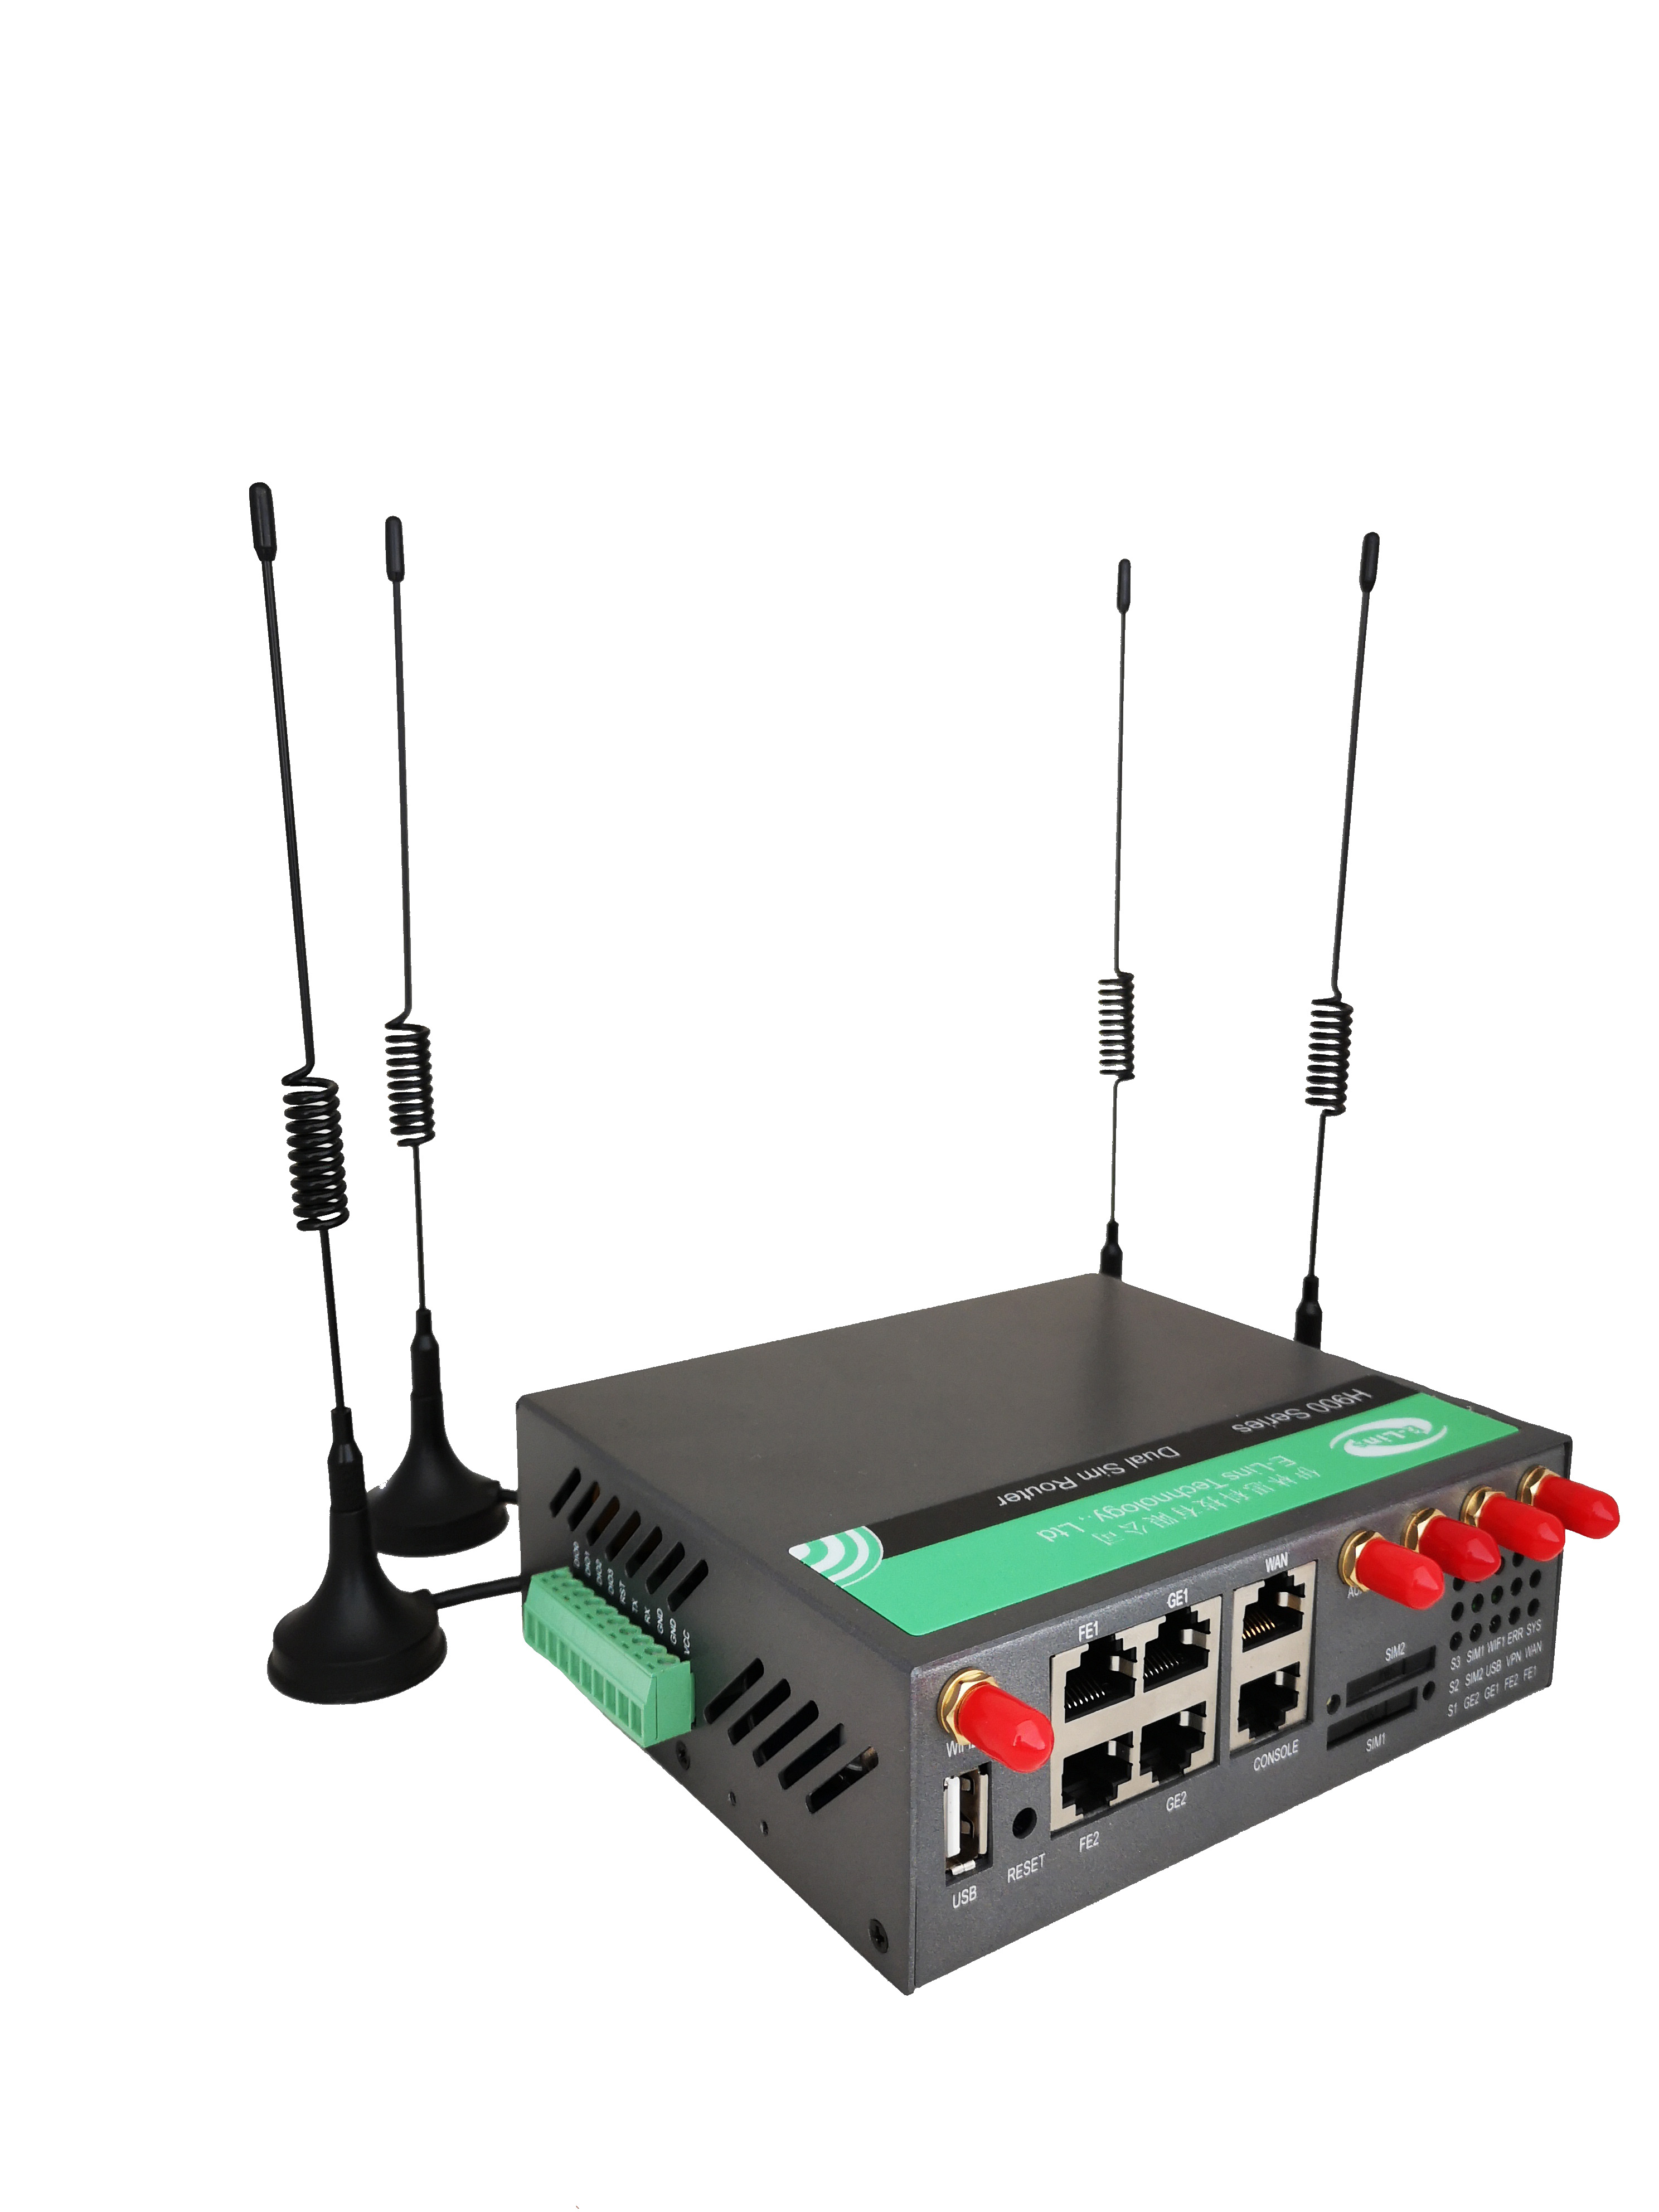 5G SIM Card Router With External Antennas Replaceable High Gain